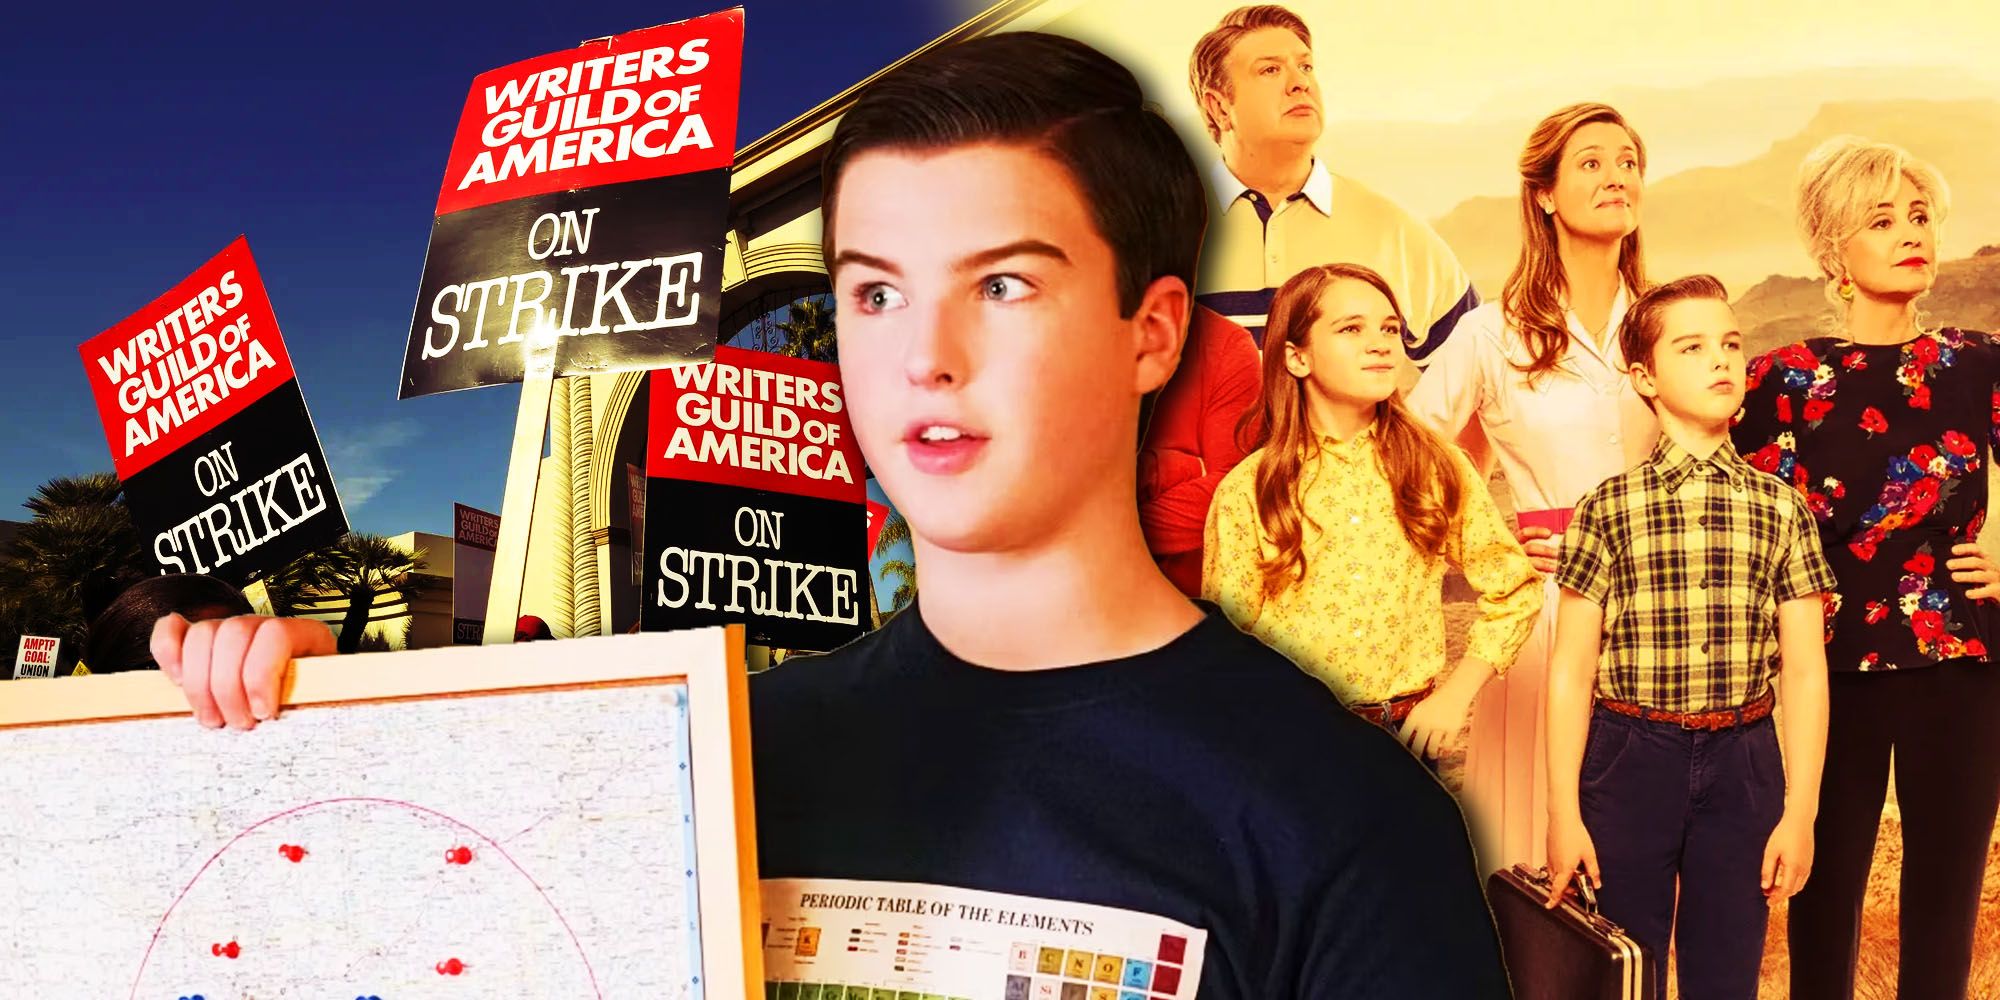 Writers Strike Picket Signs and the cast of Young Sheldon